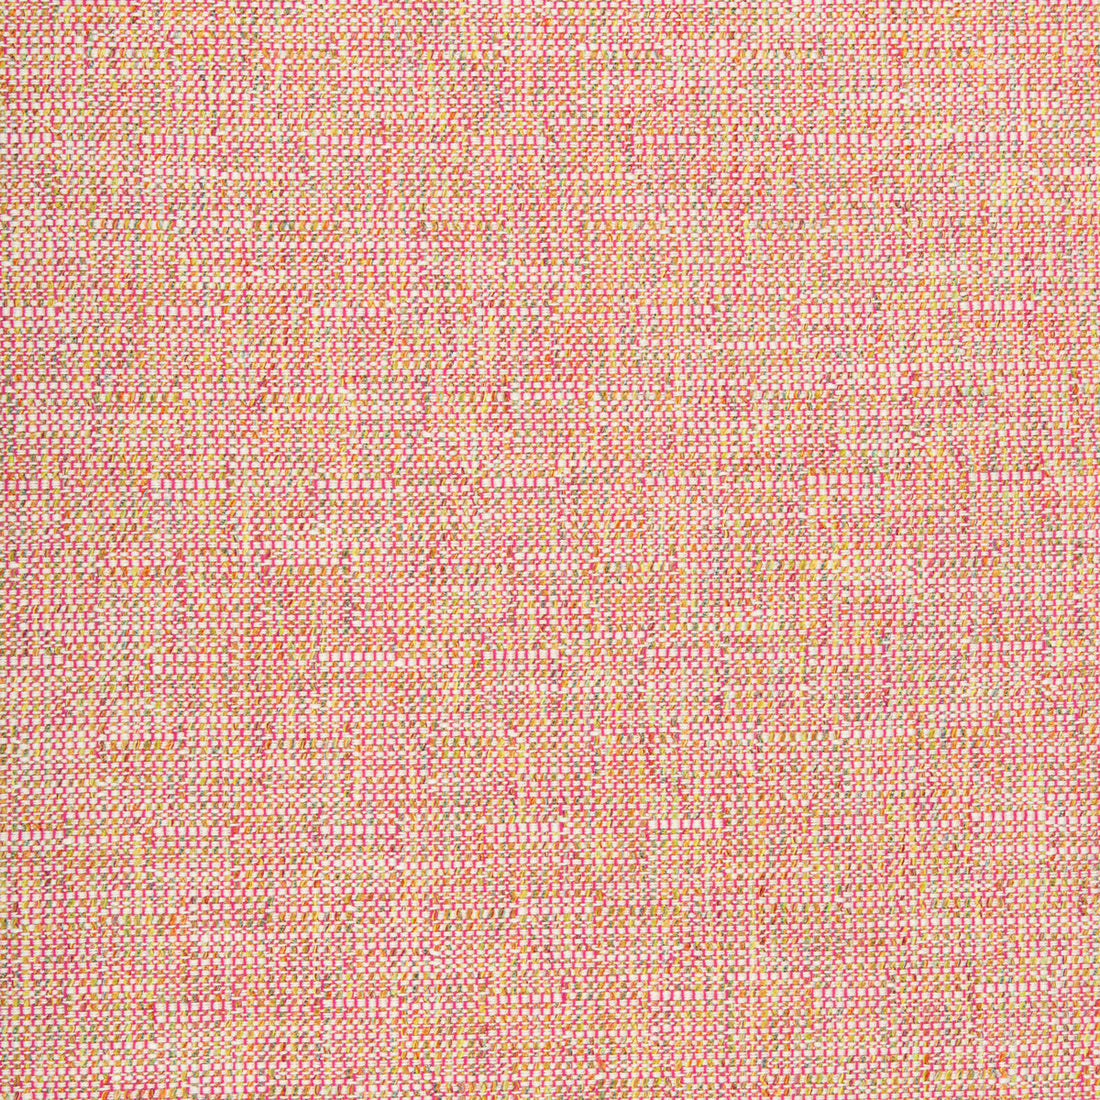 Kravet Smart fabric in 35518-713 color - pattern 35518.713.0 - by Kravet Smart in the Inside Out Performance Fabrics collection